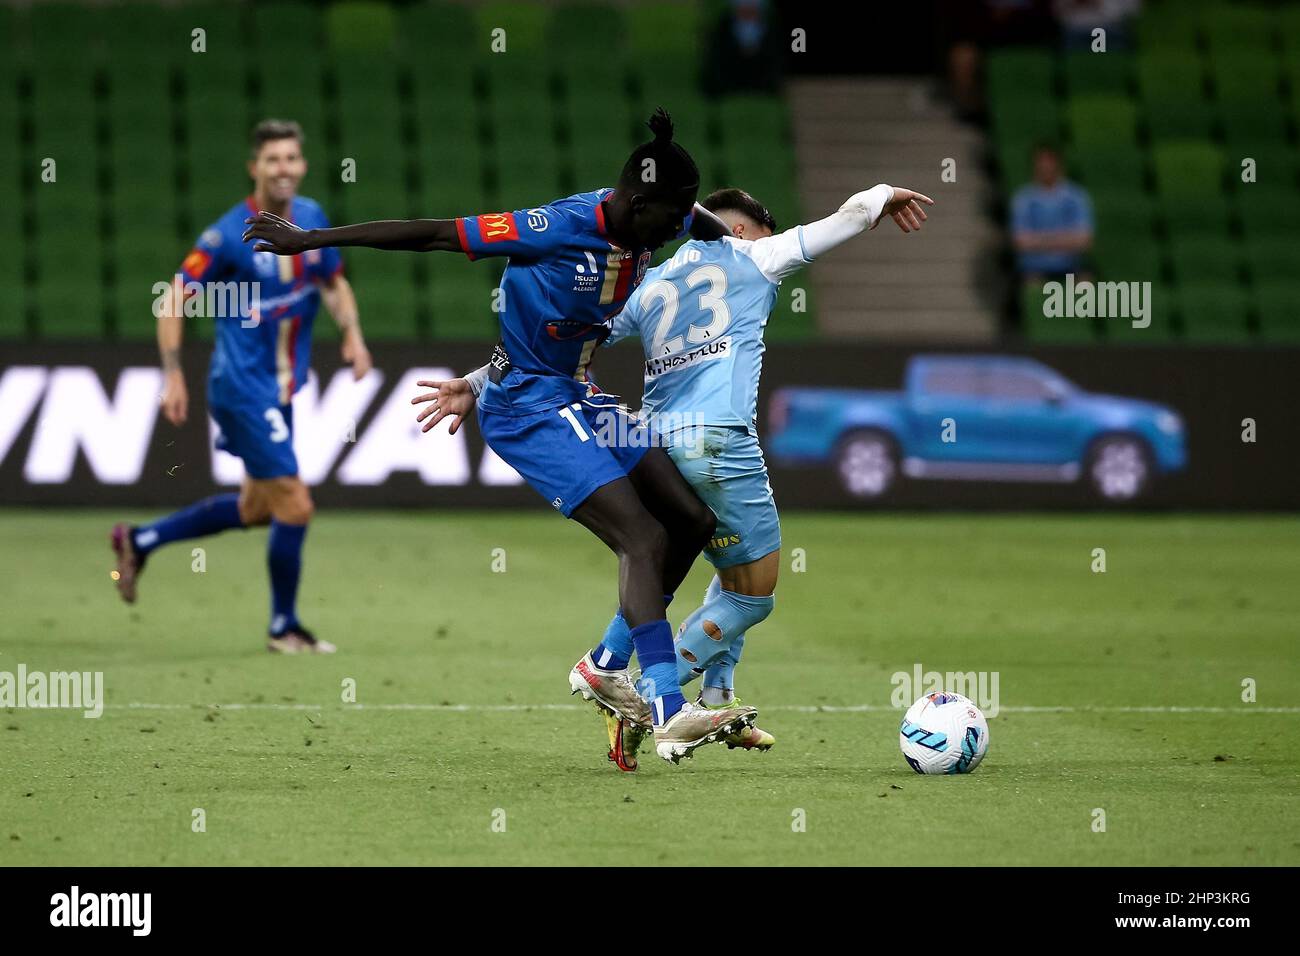 Melbourne, Australia, 18 February, 2022. Valentino Yuel of Newcastle Jets and Marco Tilio of Melbourne City FC collide during the A-League soccer match between Melbourne City FC and Newcastle Jets at AAMI Park on February 18, 2022 in Melbourne, Australia. Credit: Dave Hewison/Speed Media/Alamy Live News Stock Photo